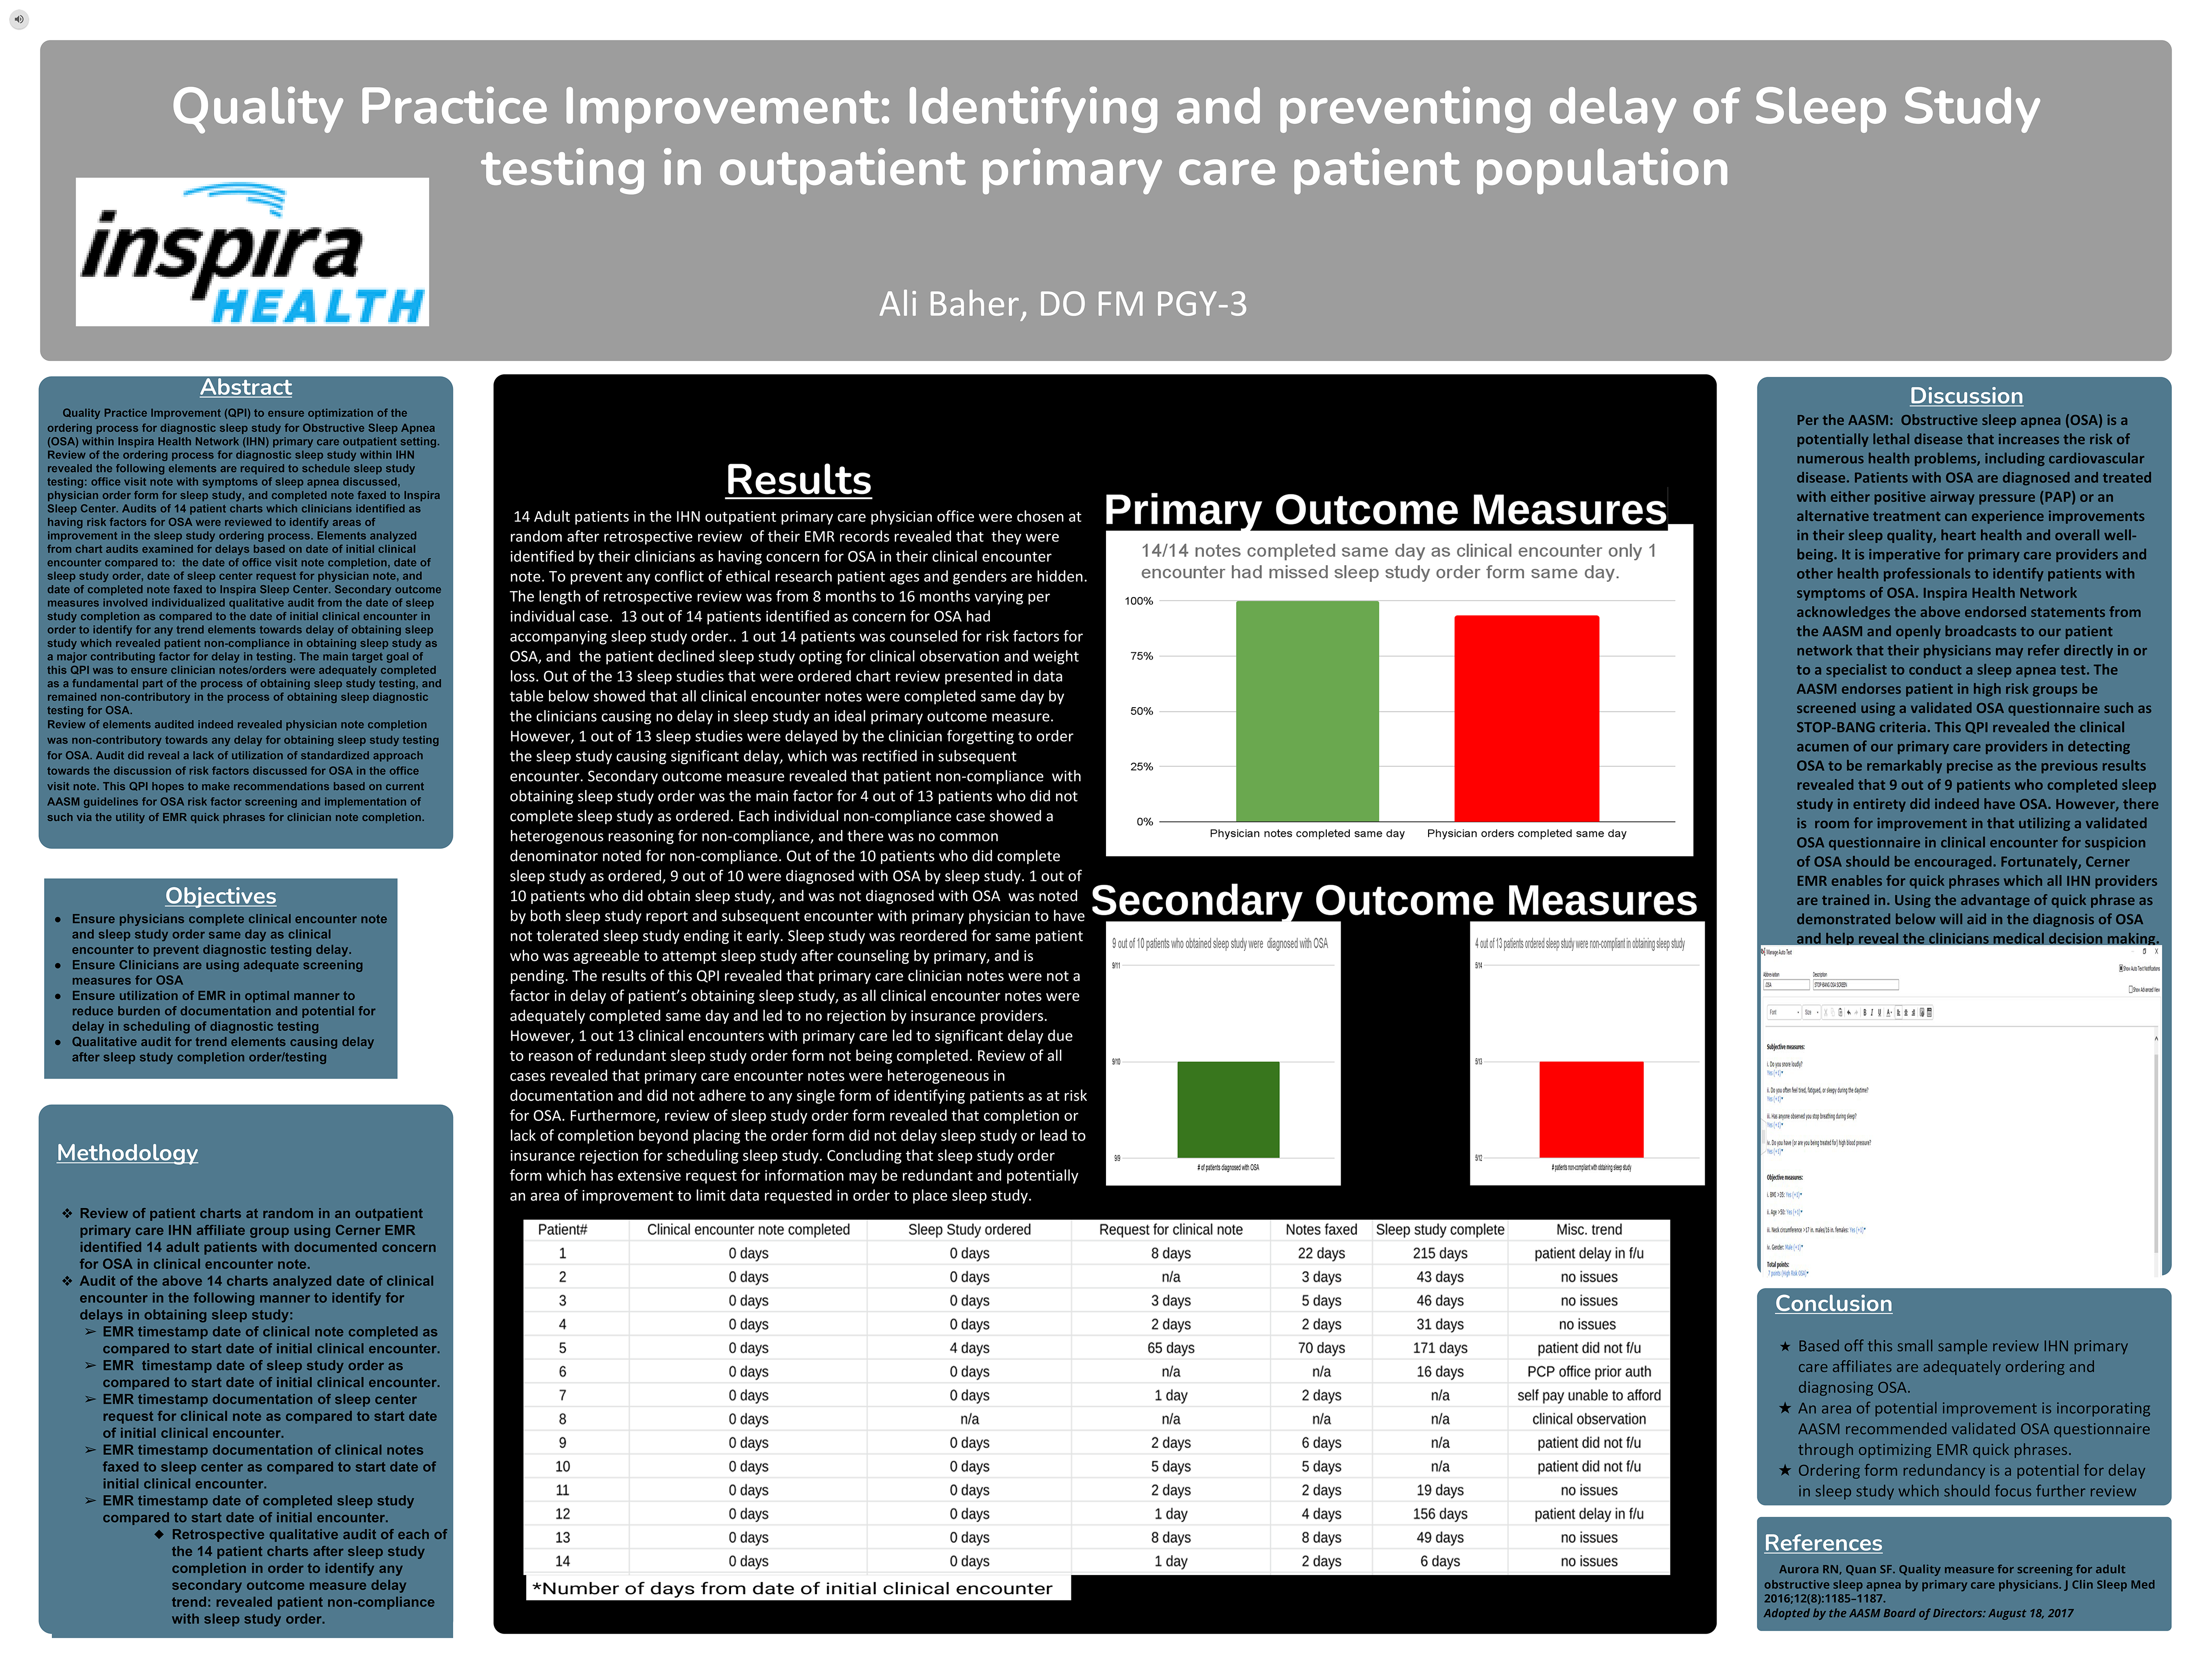 Quality Practice Improvement: Identifying and preventing delay of Sleep Study testing in outpatient primary care patient population